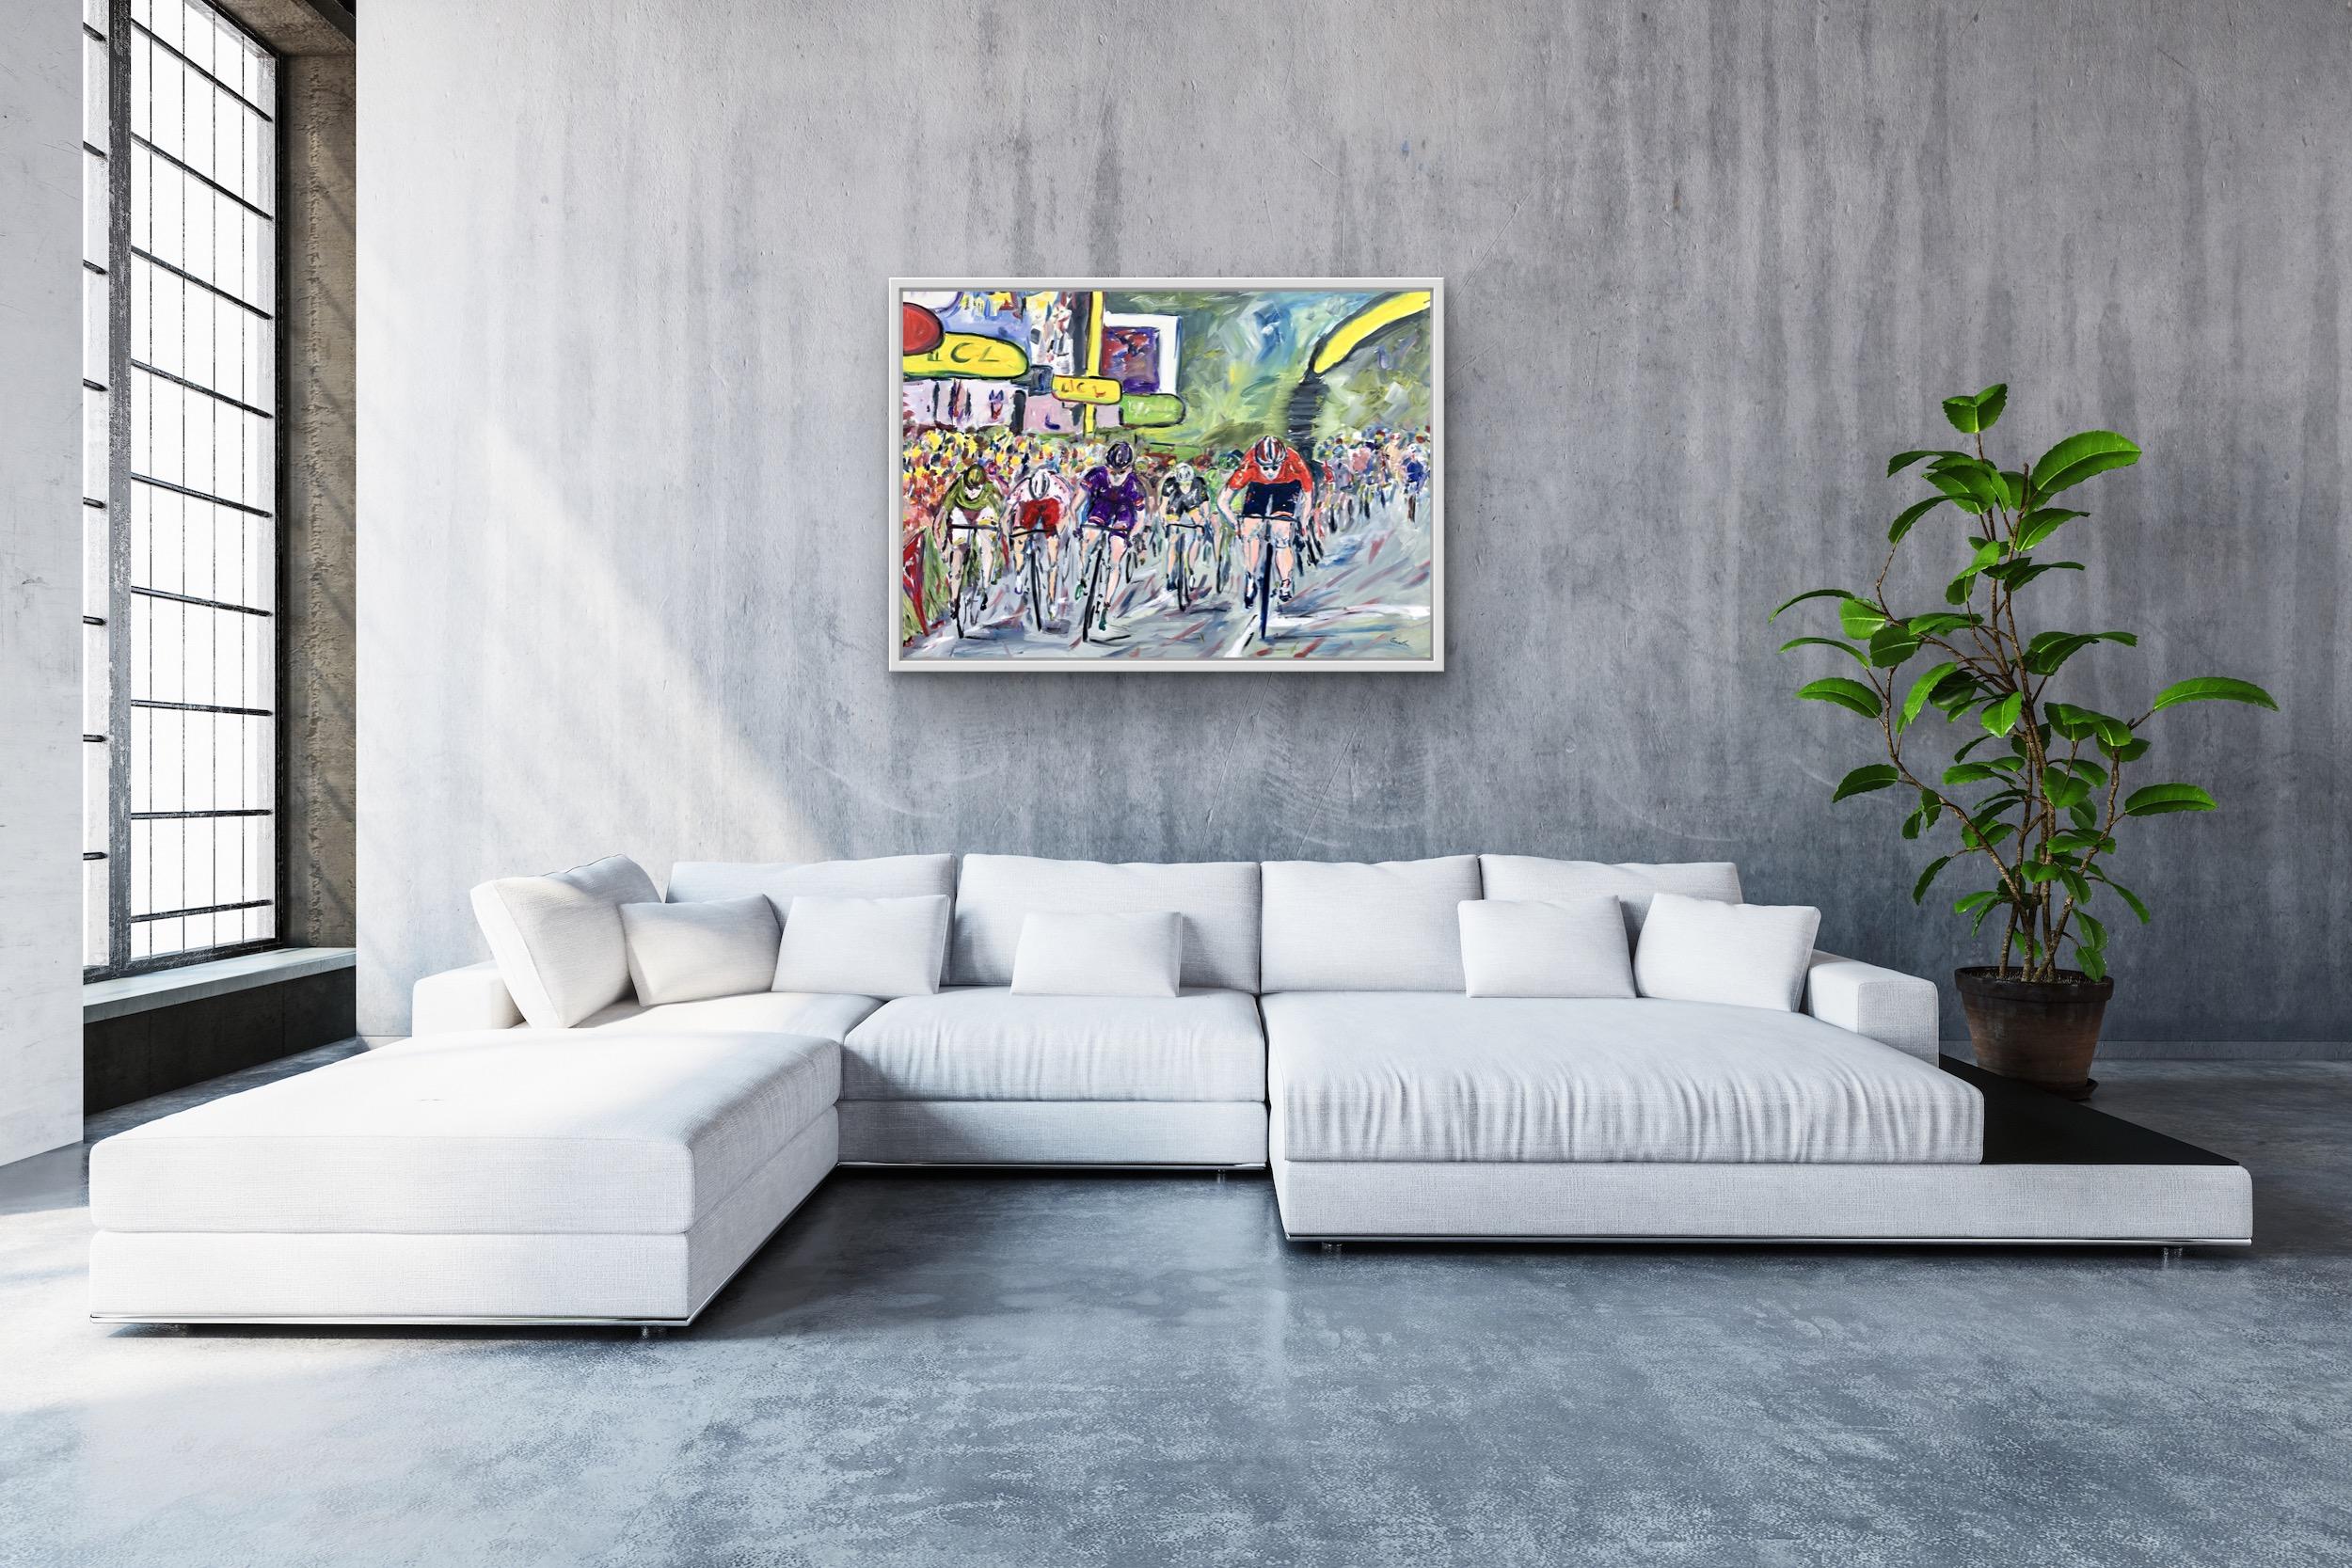 The Final Sprint - Tour de France Stage 15 2015, bicycle art, affordable art - Painting by Gareth Bayley